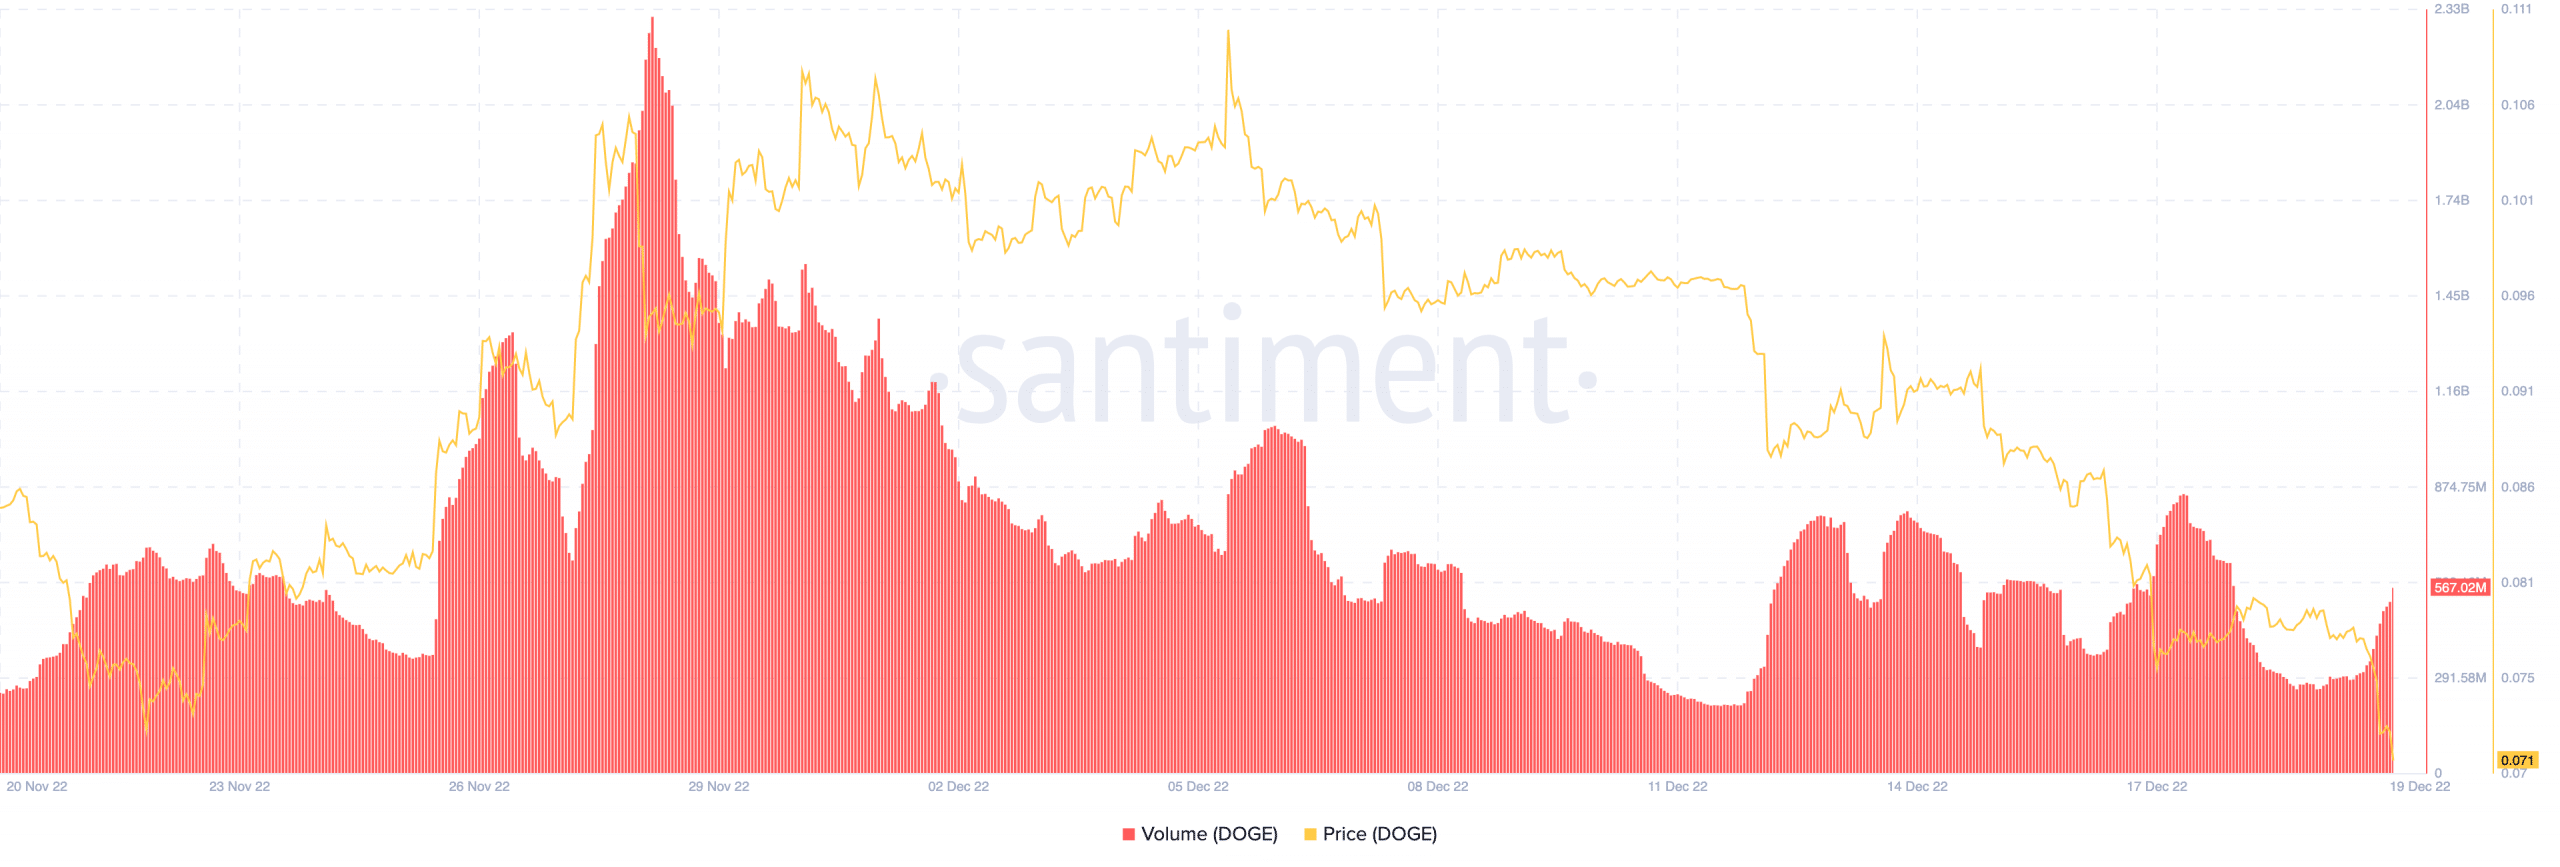 Dogecoin price and volume 